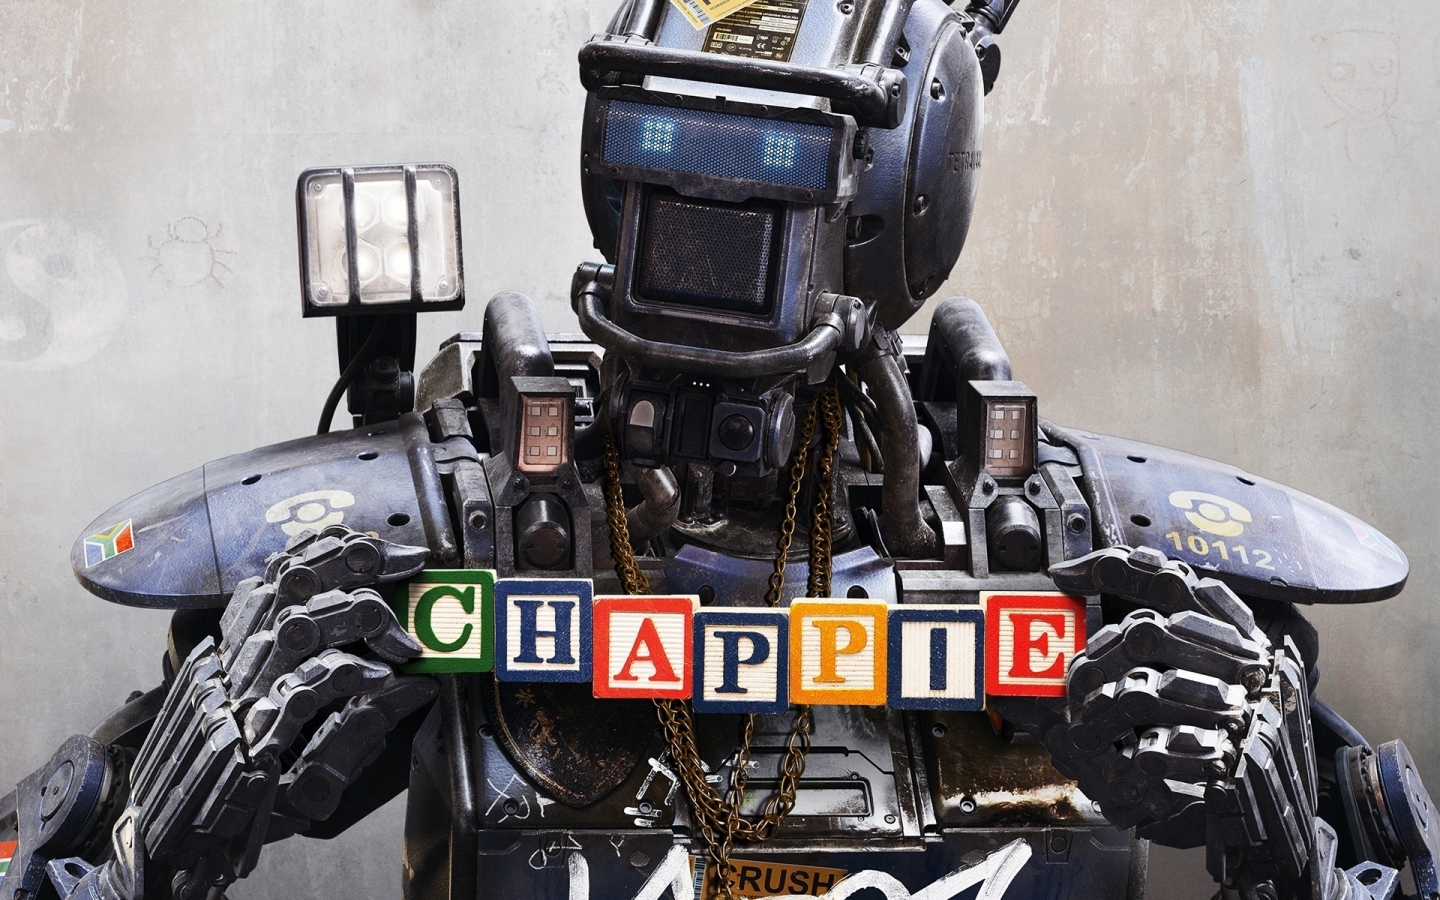 Chappie Robot for 1440 x 900 widescreen resolution